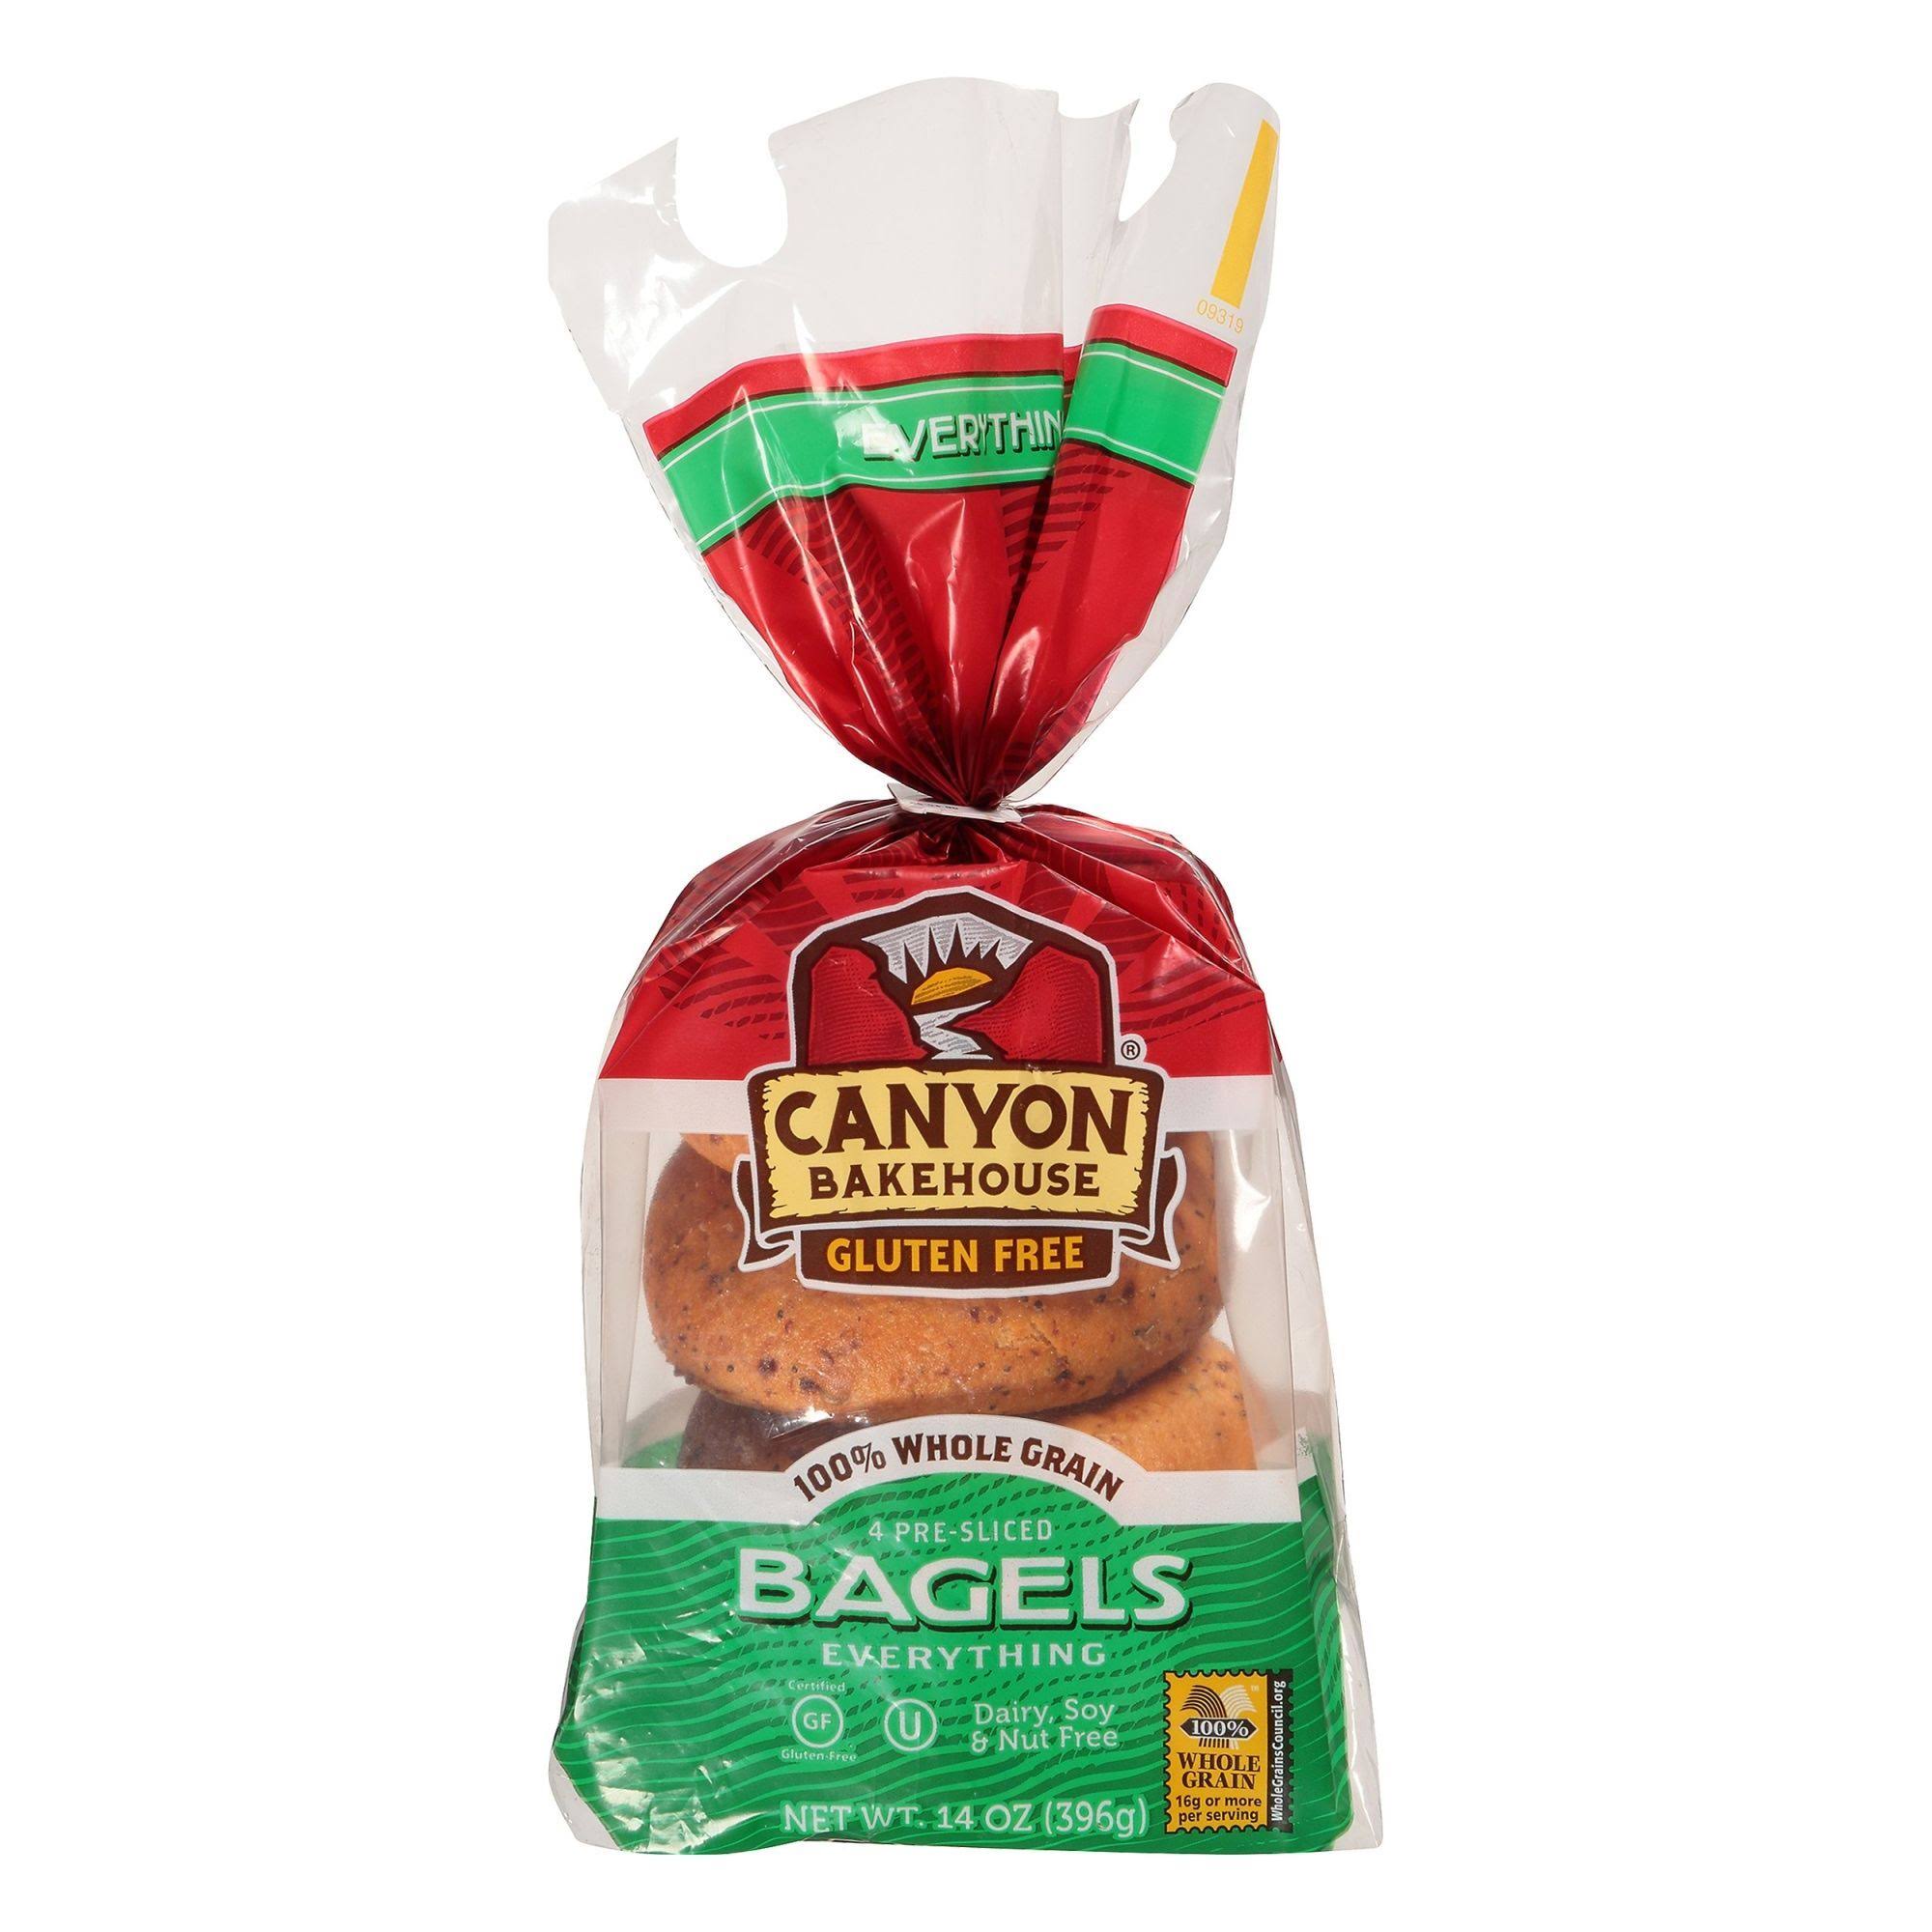 Canyon Bakehouse Gluten Free Bread and Bagel Variety Pack